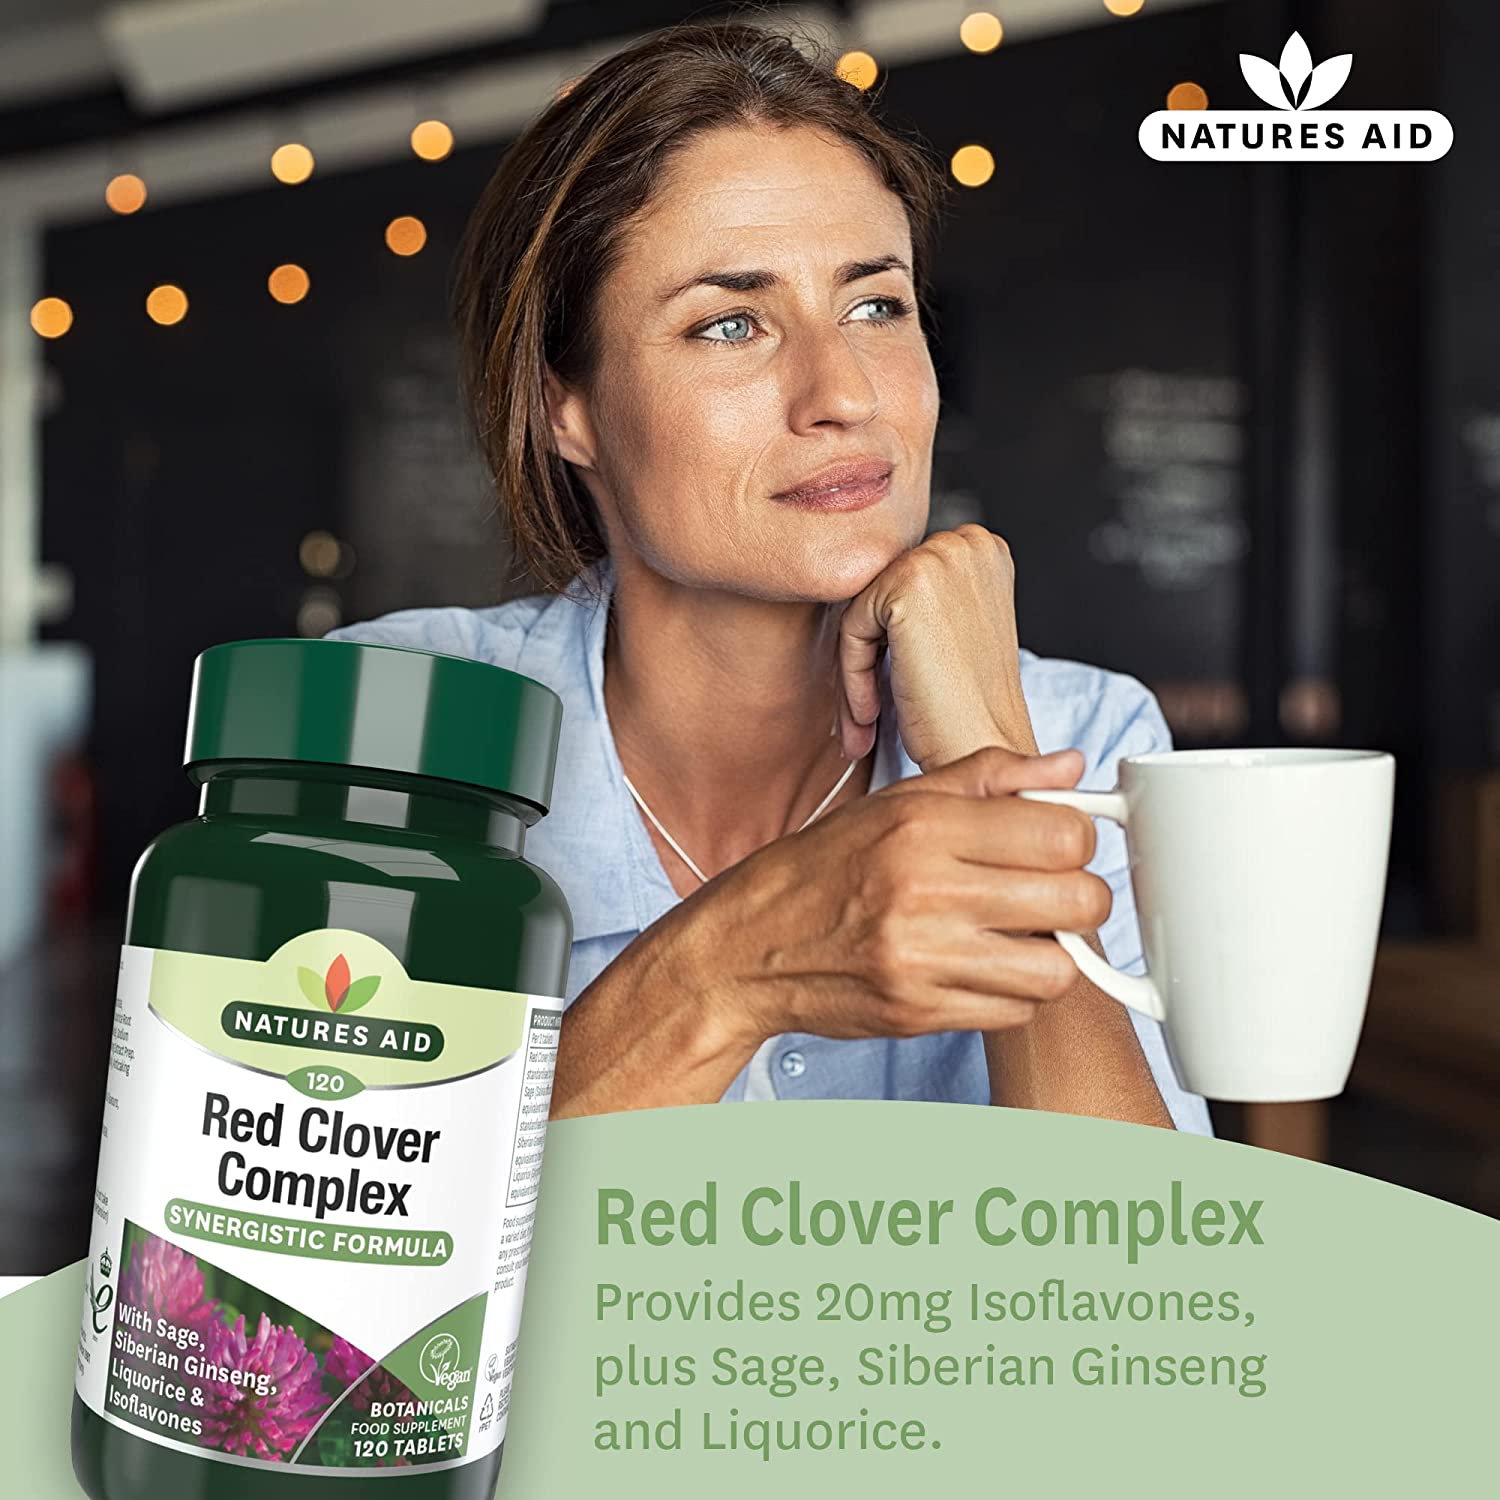 Red Clover Complex Sage Siberian Ginseng & Liquorice 120 Tablets